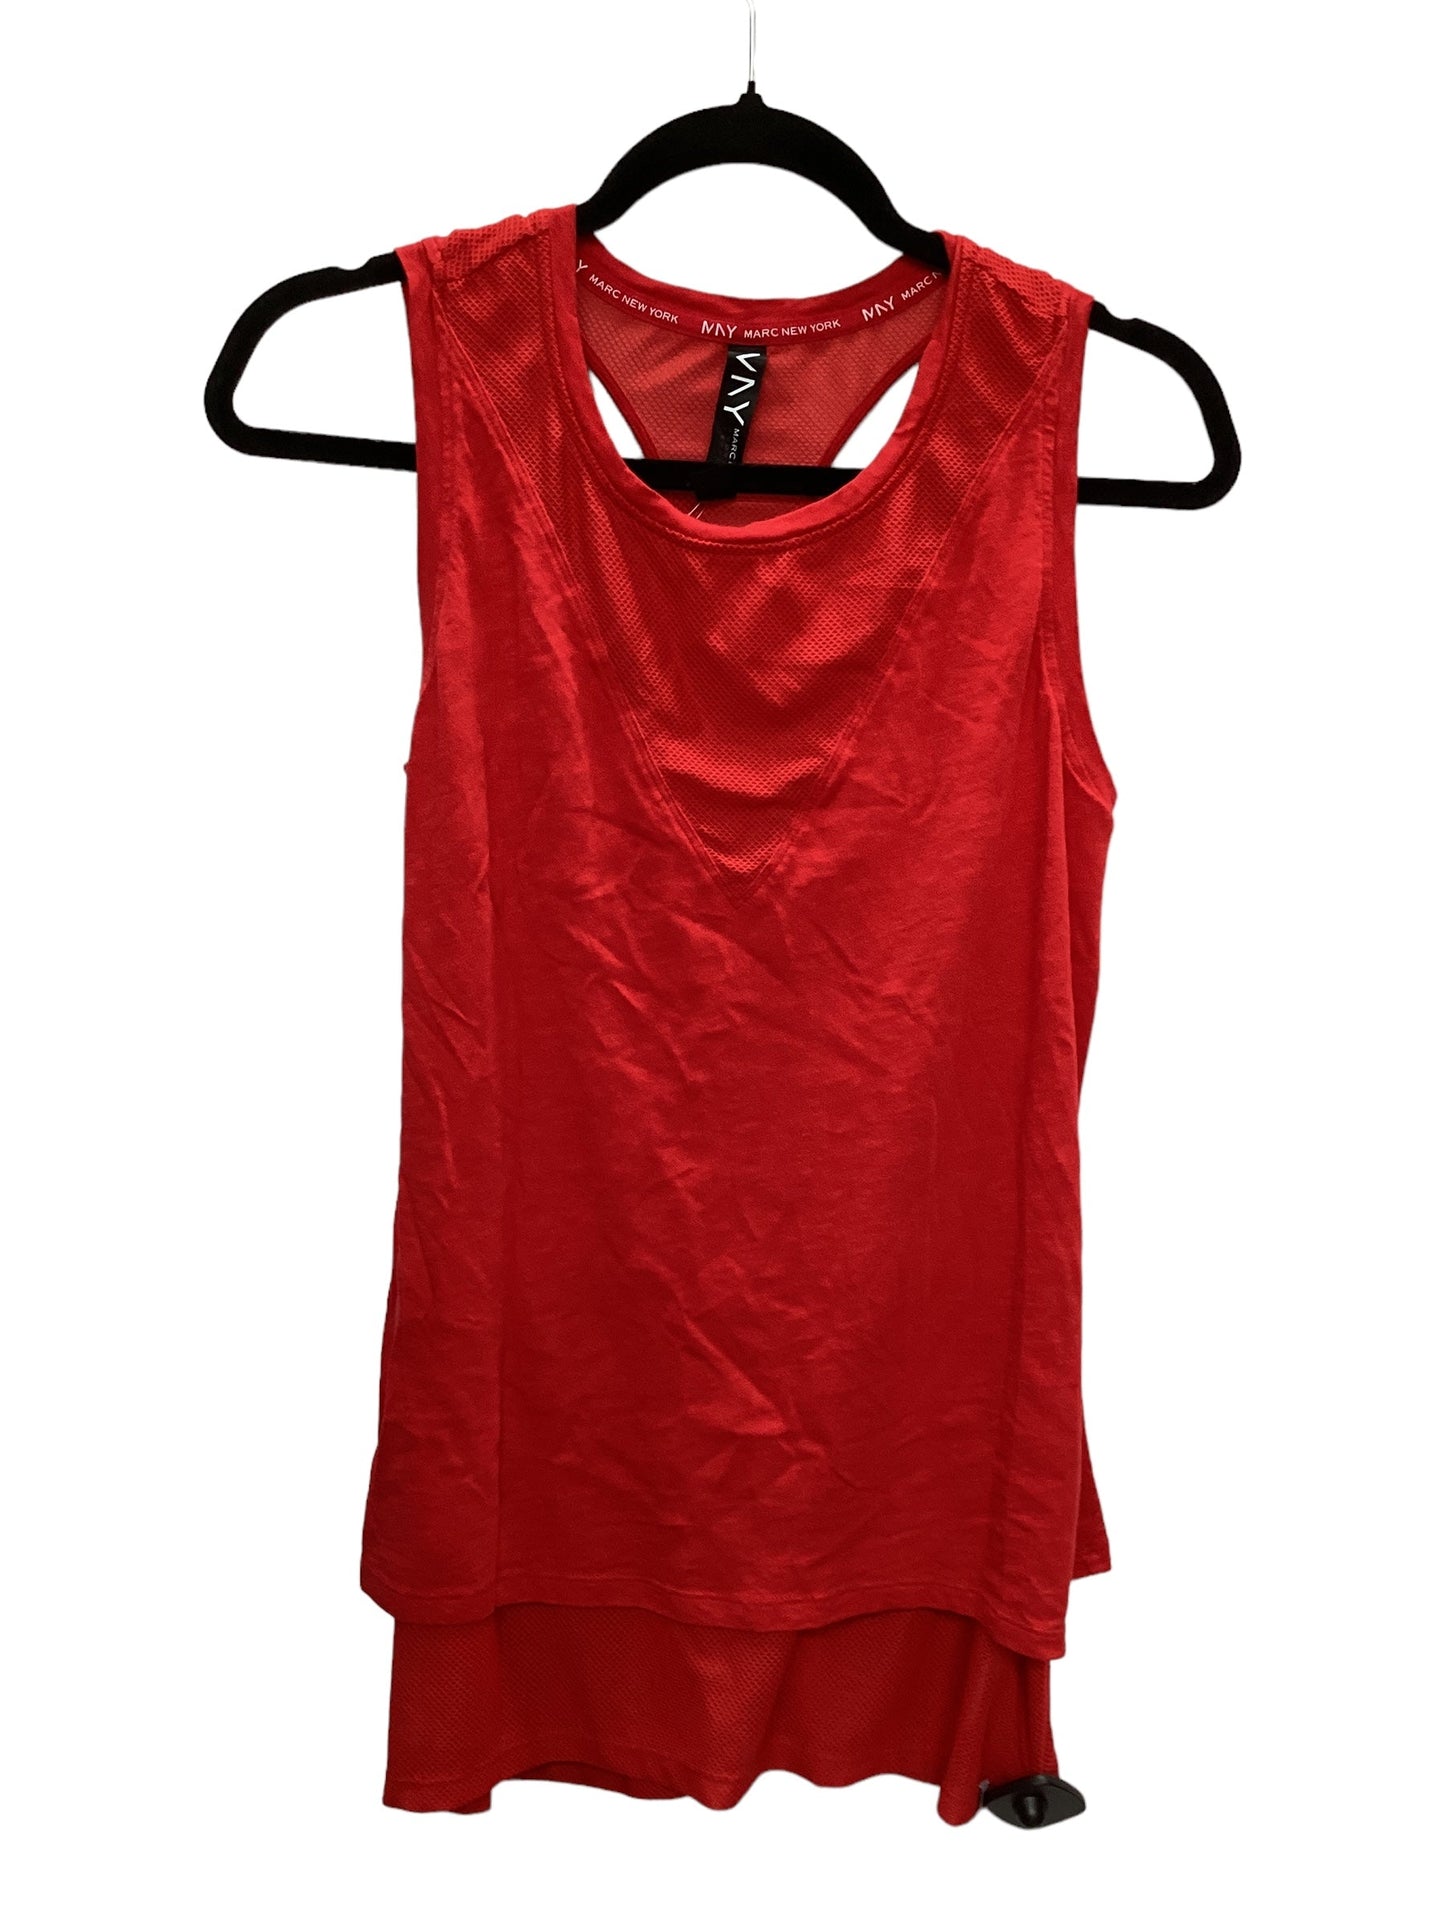 Red Athletic Tank Top Marc New York, Size L